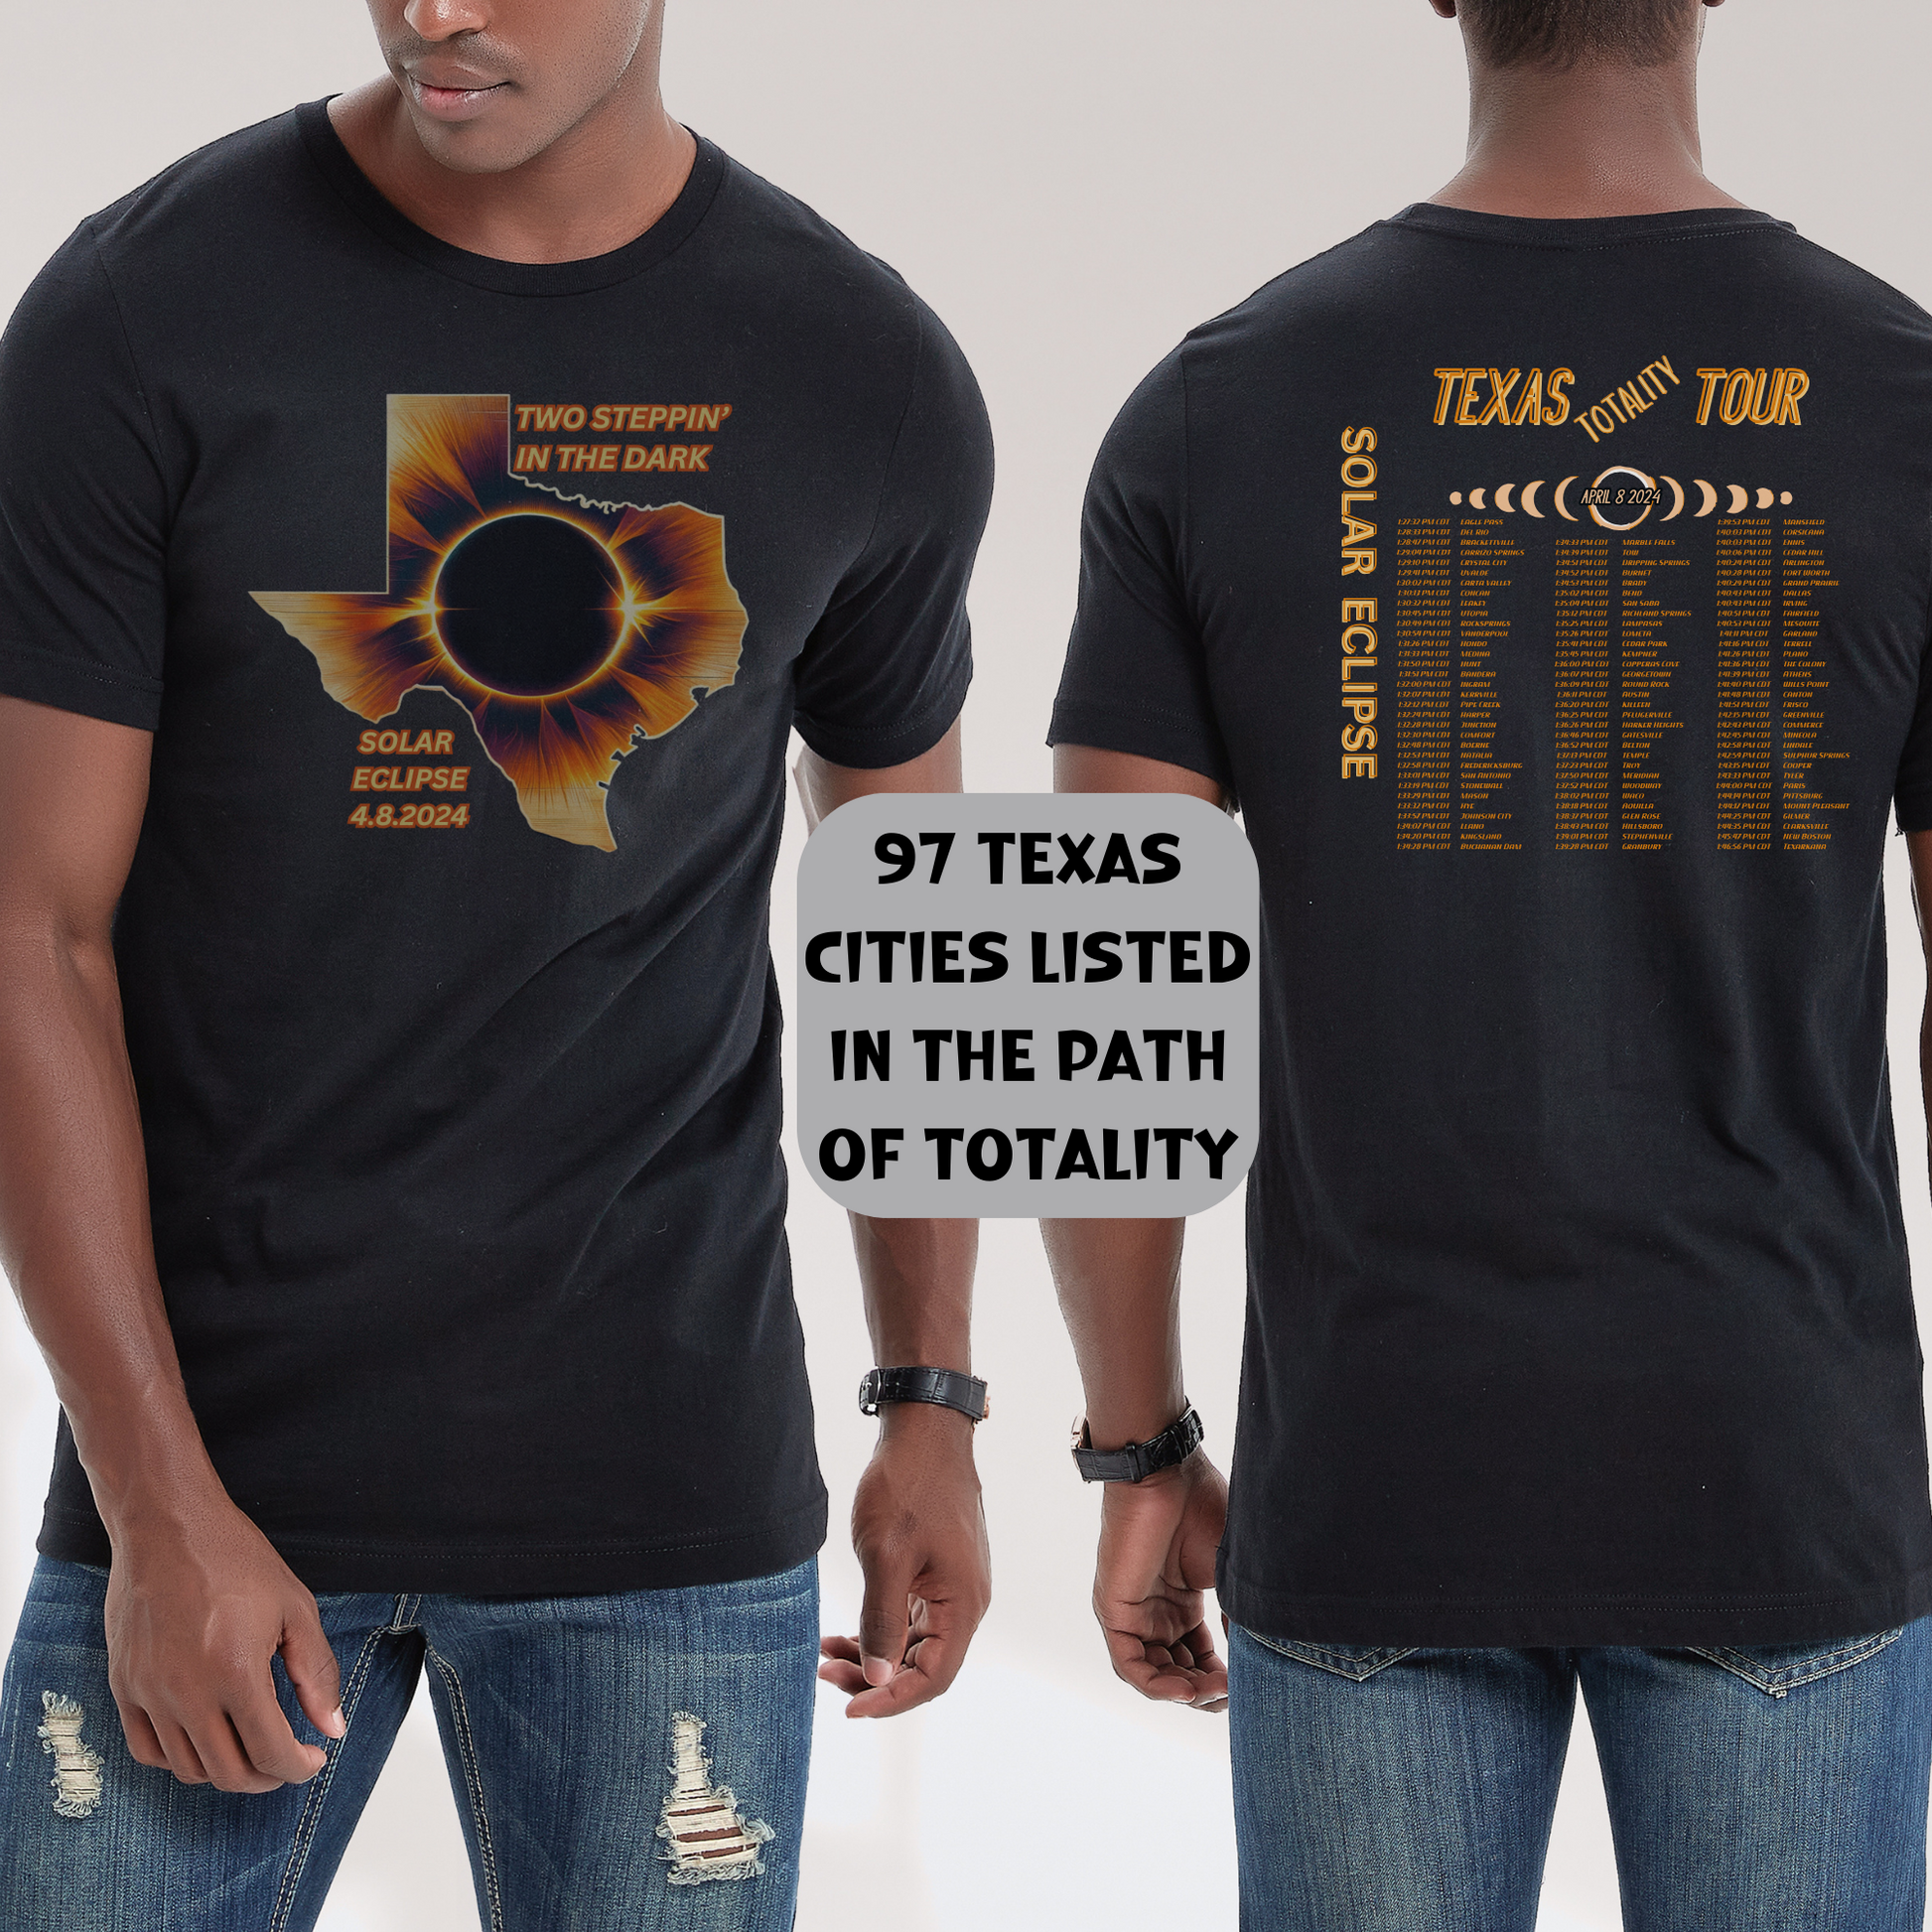 Texas Solar Eclipse graphic reads Two Steppin' in the dark Solar Eclipse 4.8.2024 and 2024 Eclipse Texas Totality Tour 97 Texas Cities listed in Concert Style back of Tee 